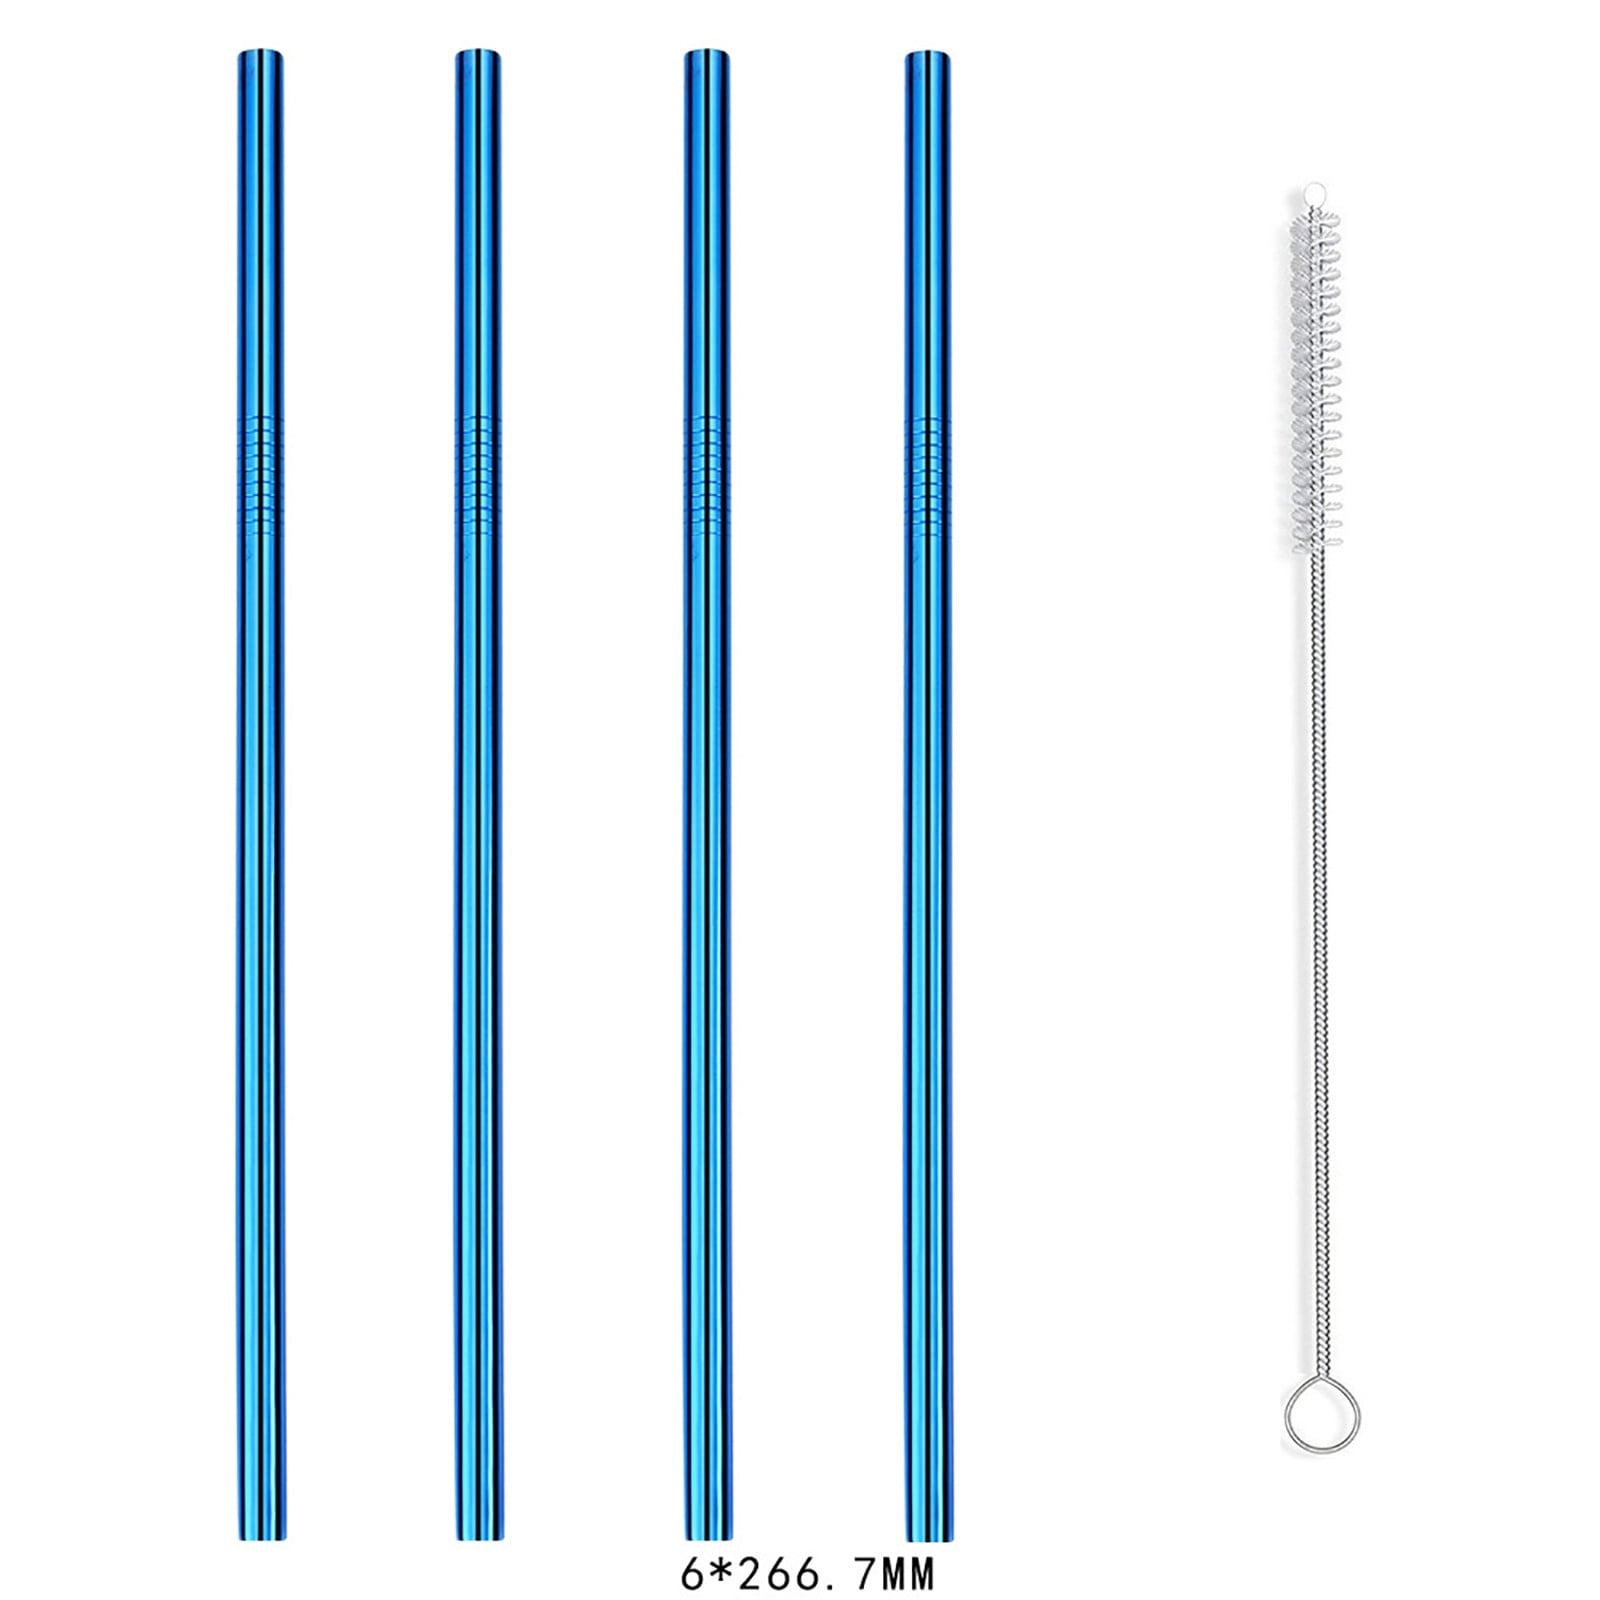 4 Straight Reusable Drinking Straws Metal Stainless Steel Eco-Friendly 10.5in